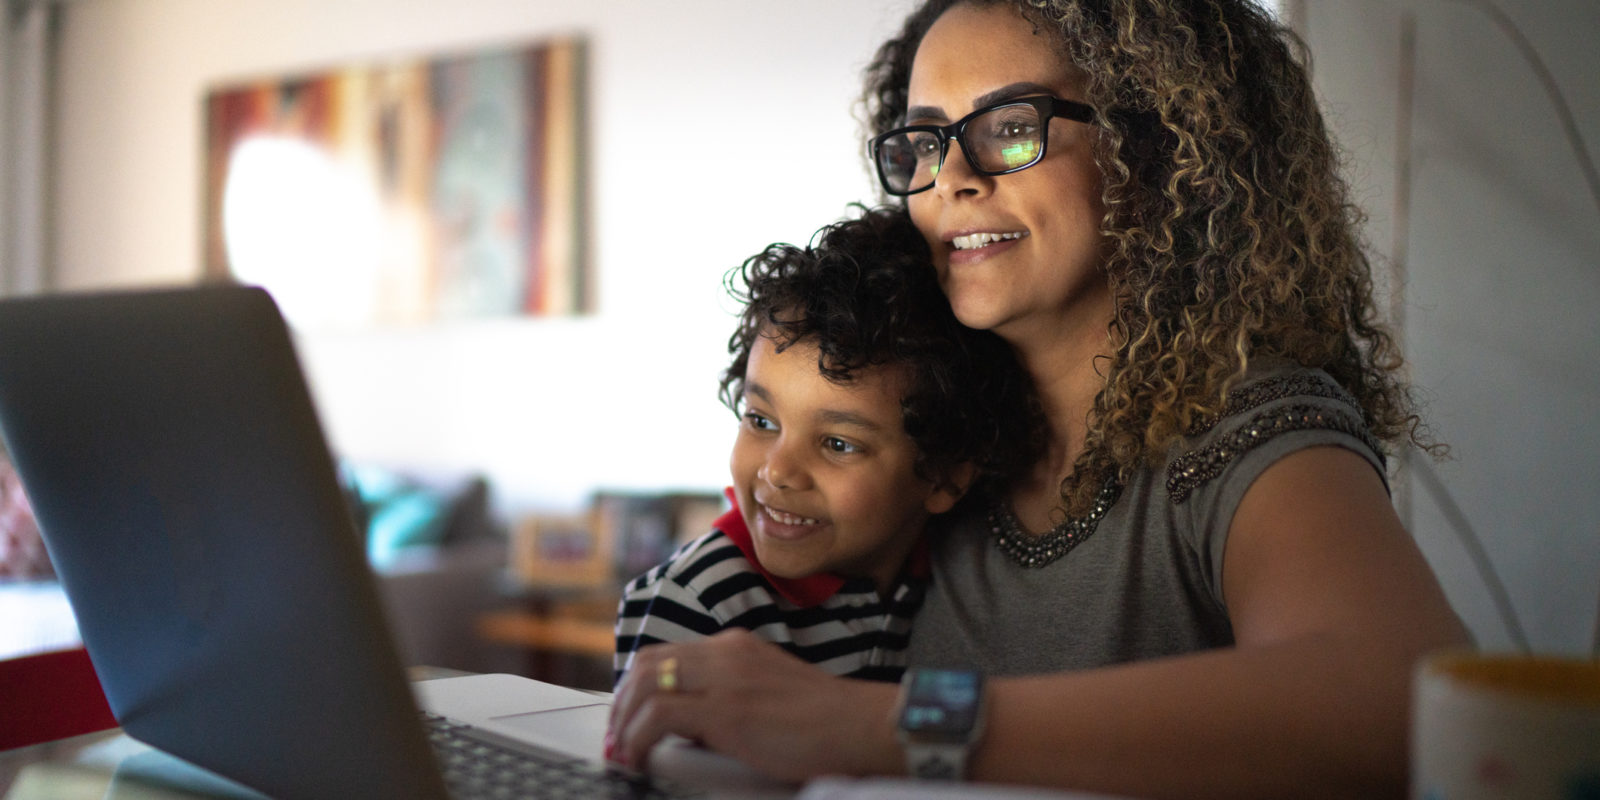 woman and young boy smile at a computer